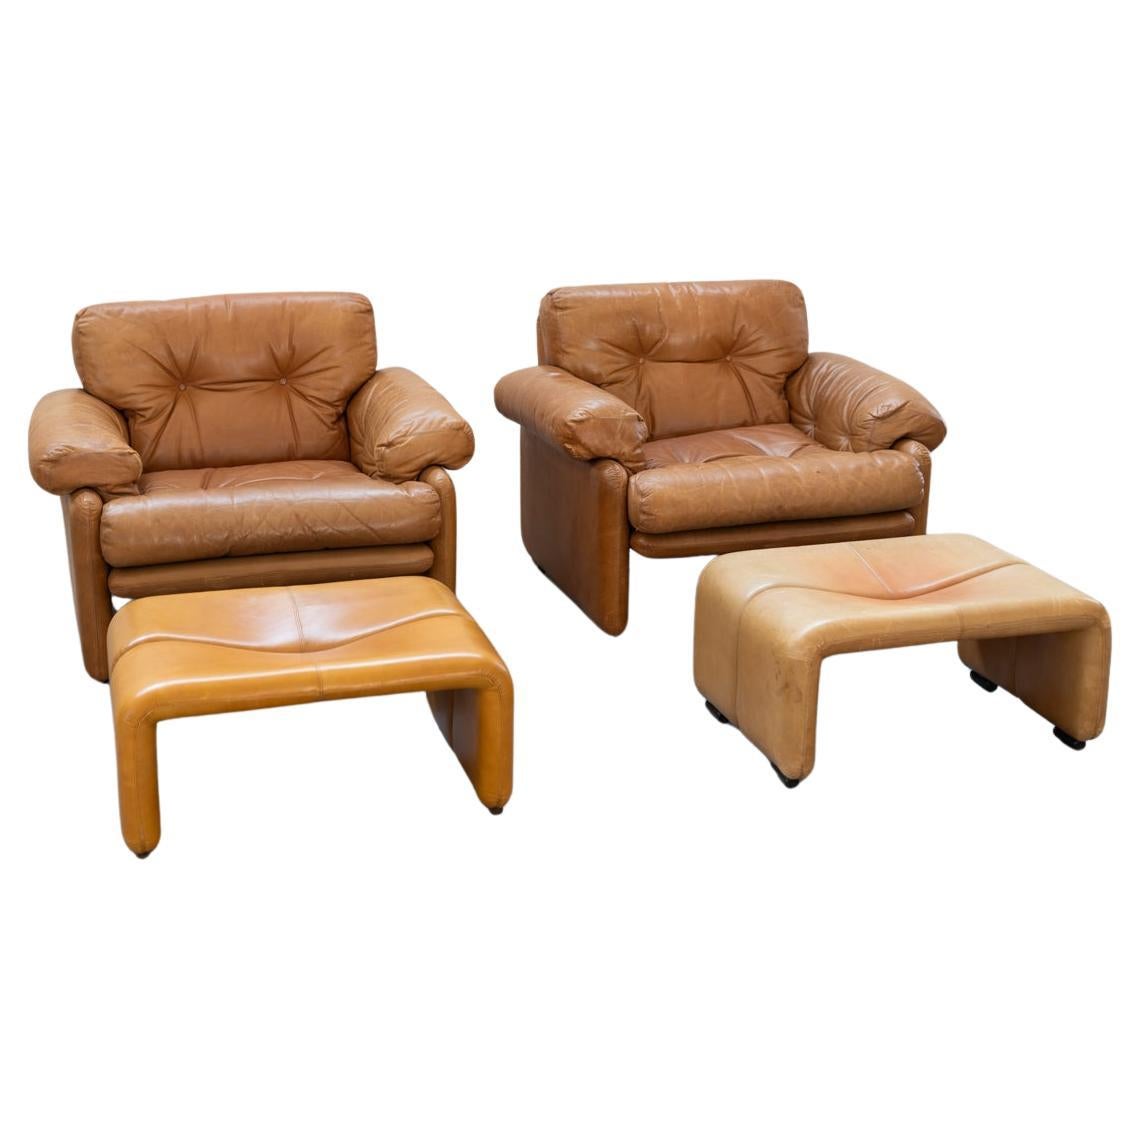 Pair of armchairs with pouf in cognac color model "Coronado" by Afra&Tobia scarpa For Sale